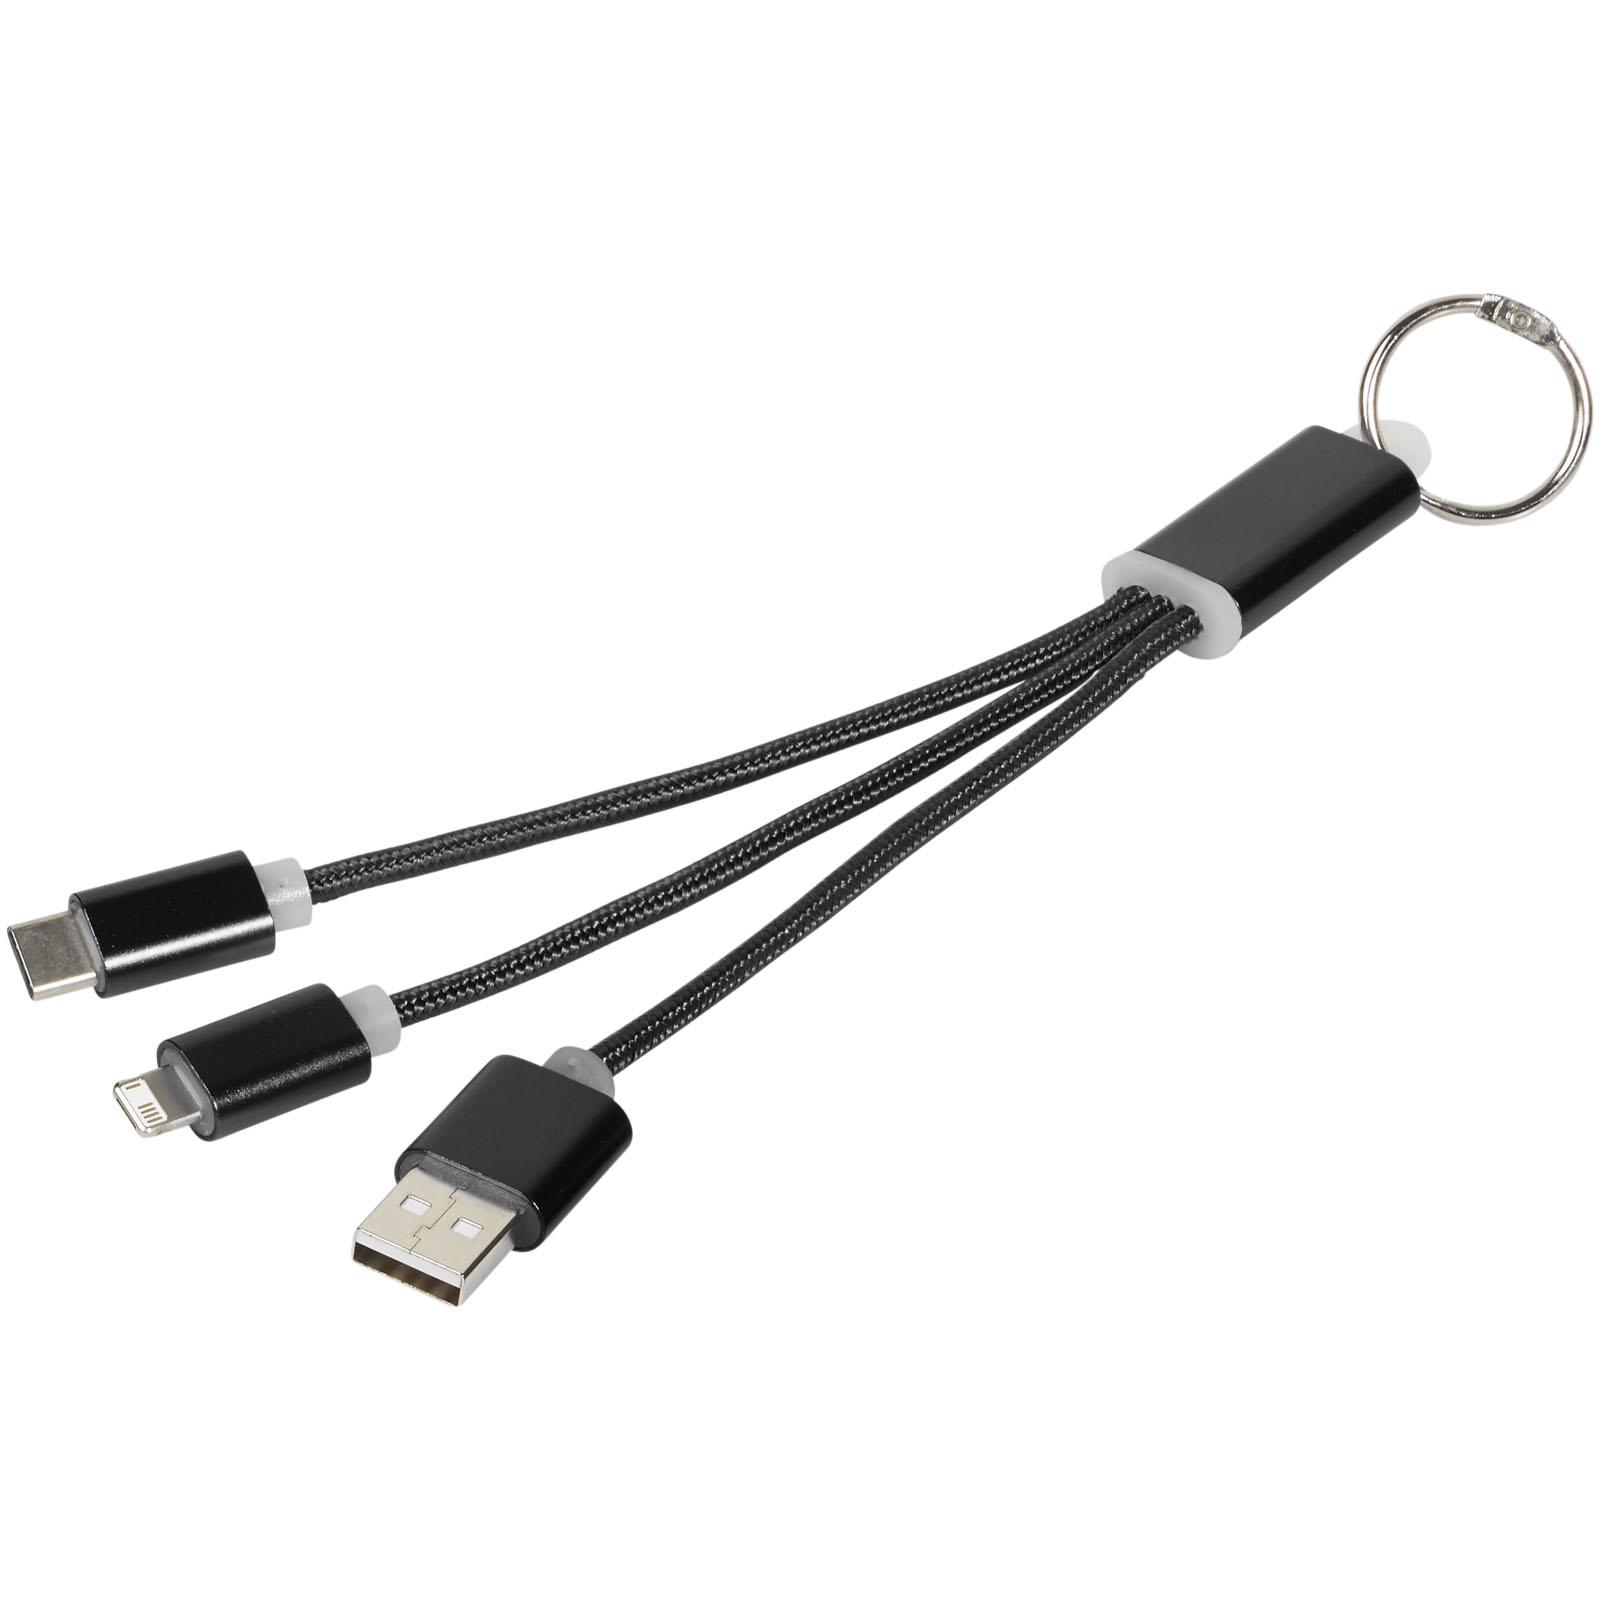 Advertising Cables - Metal 3-in-1 charging cable with keychain